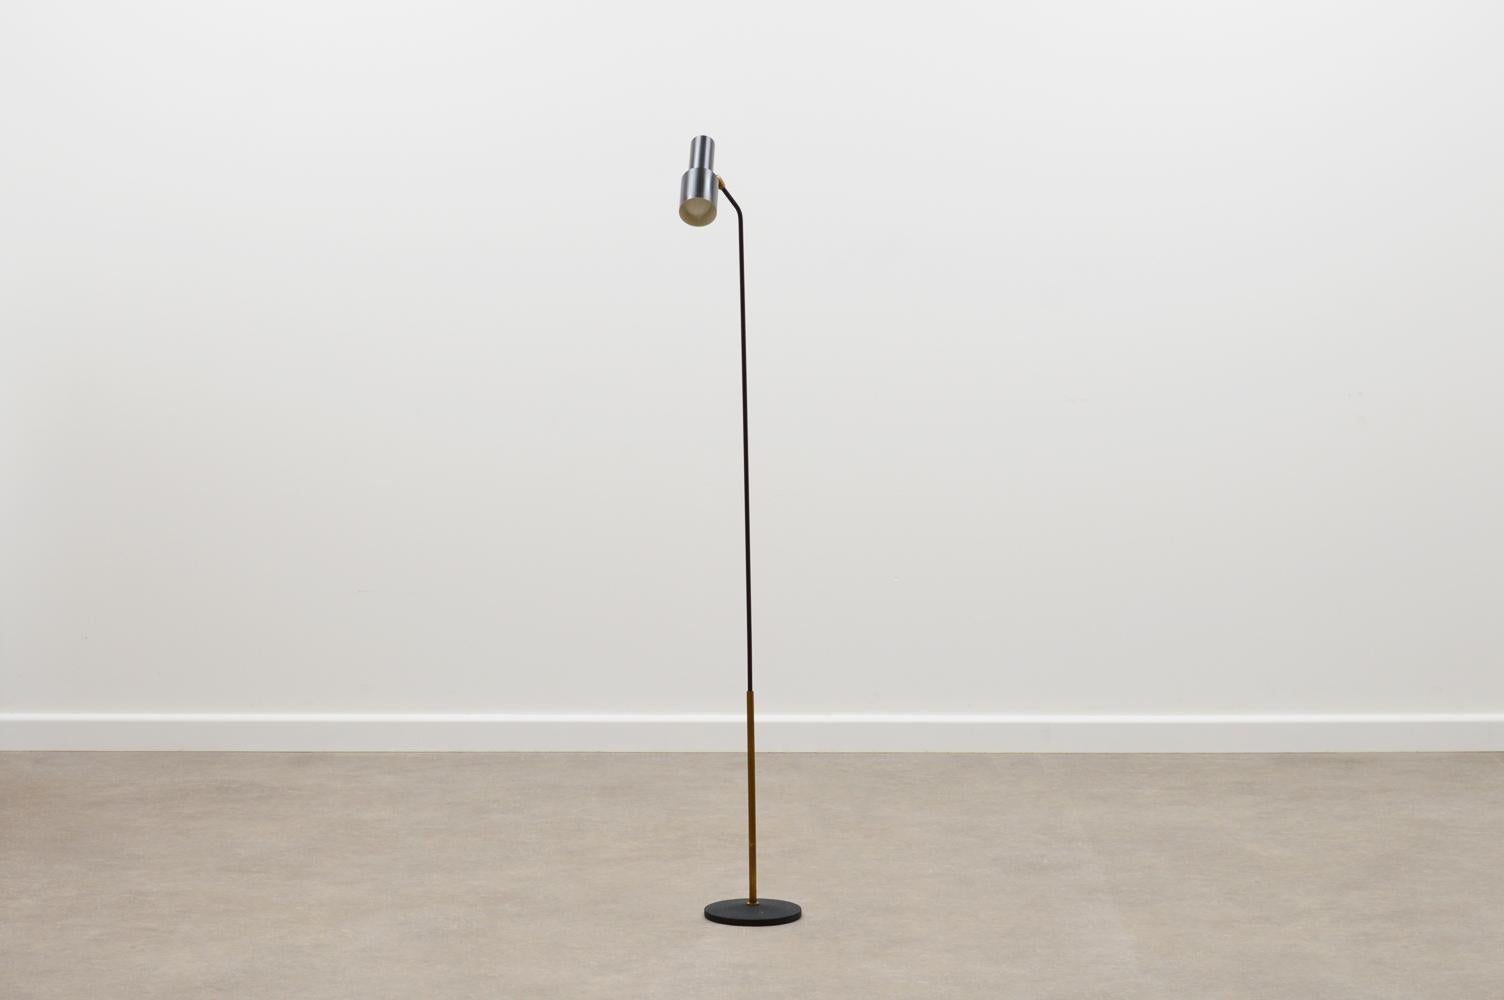 Rare Model “1968” floor lamp by Fontana Arte, Italy 60s. Minimalistic black lacquered brass lamp with cast iron shrink lacquered base. The shade can be adjusted due to the ball joint. Nice patina and in very good vintage condition.

Catalogue